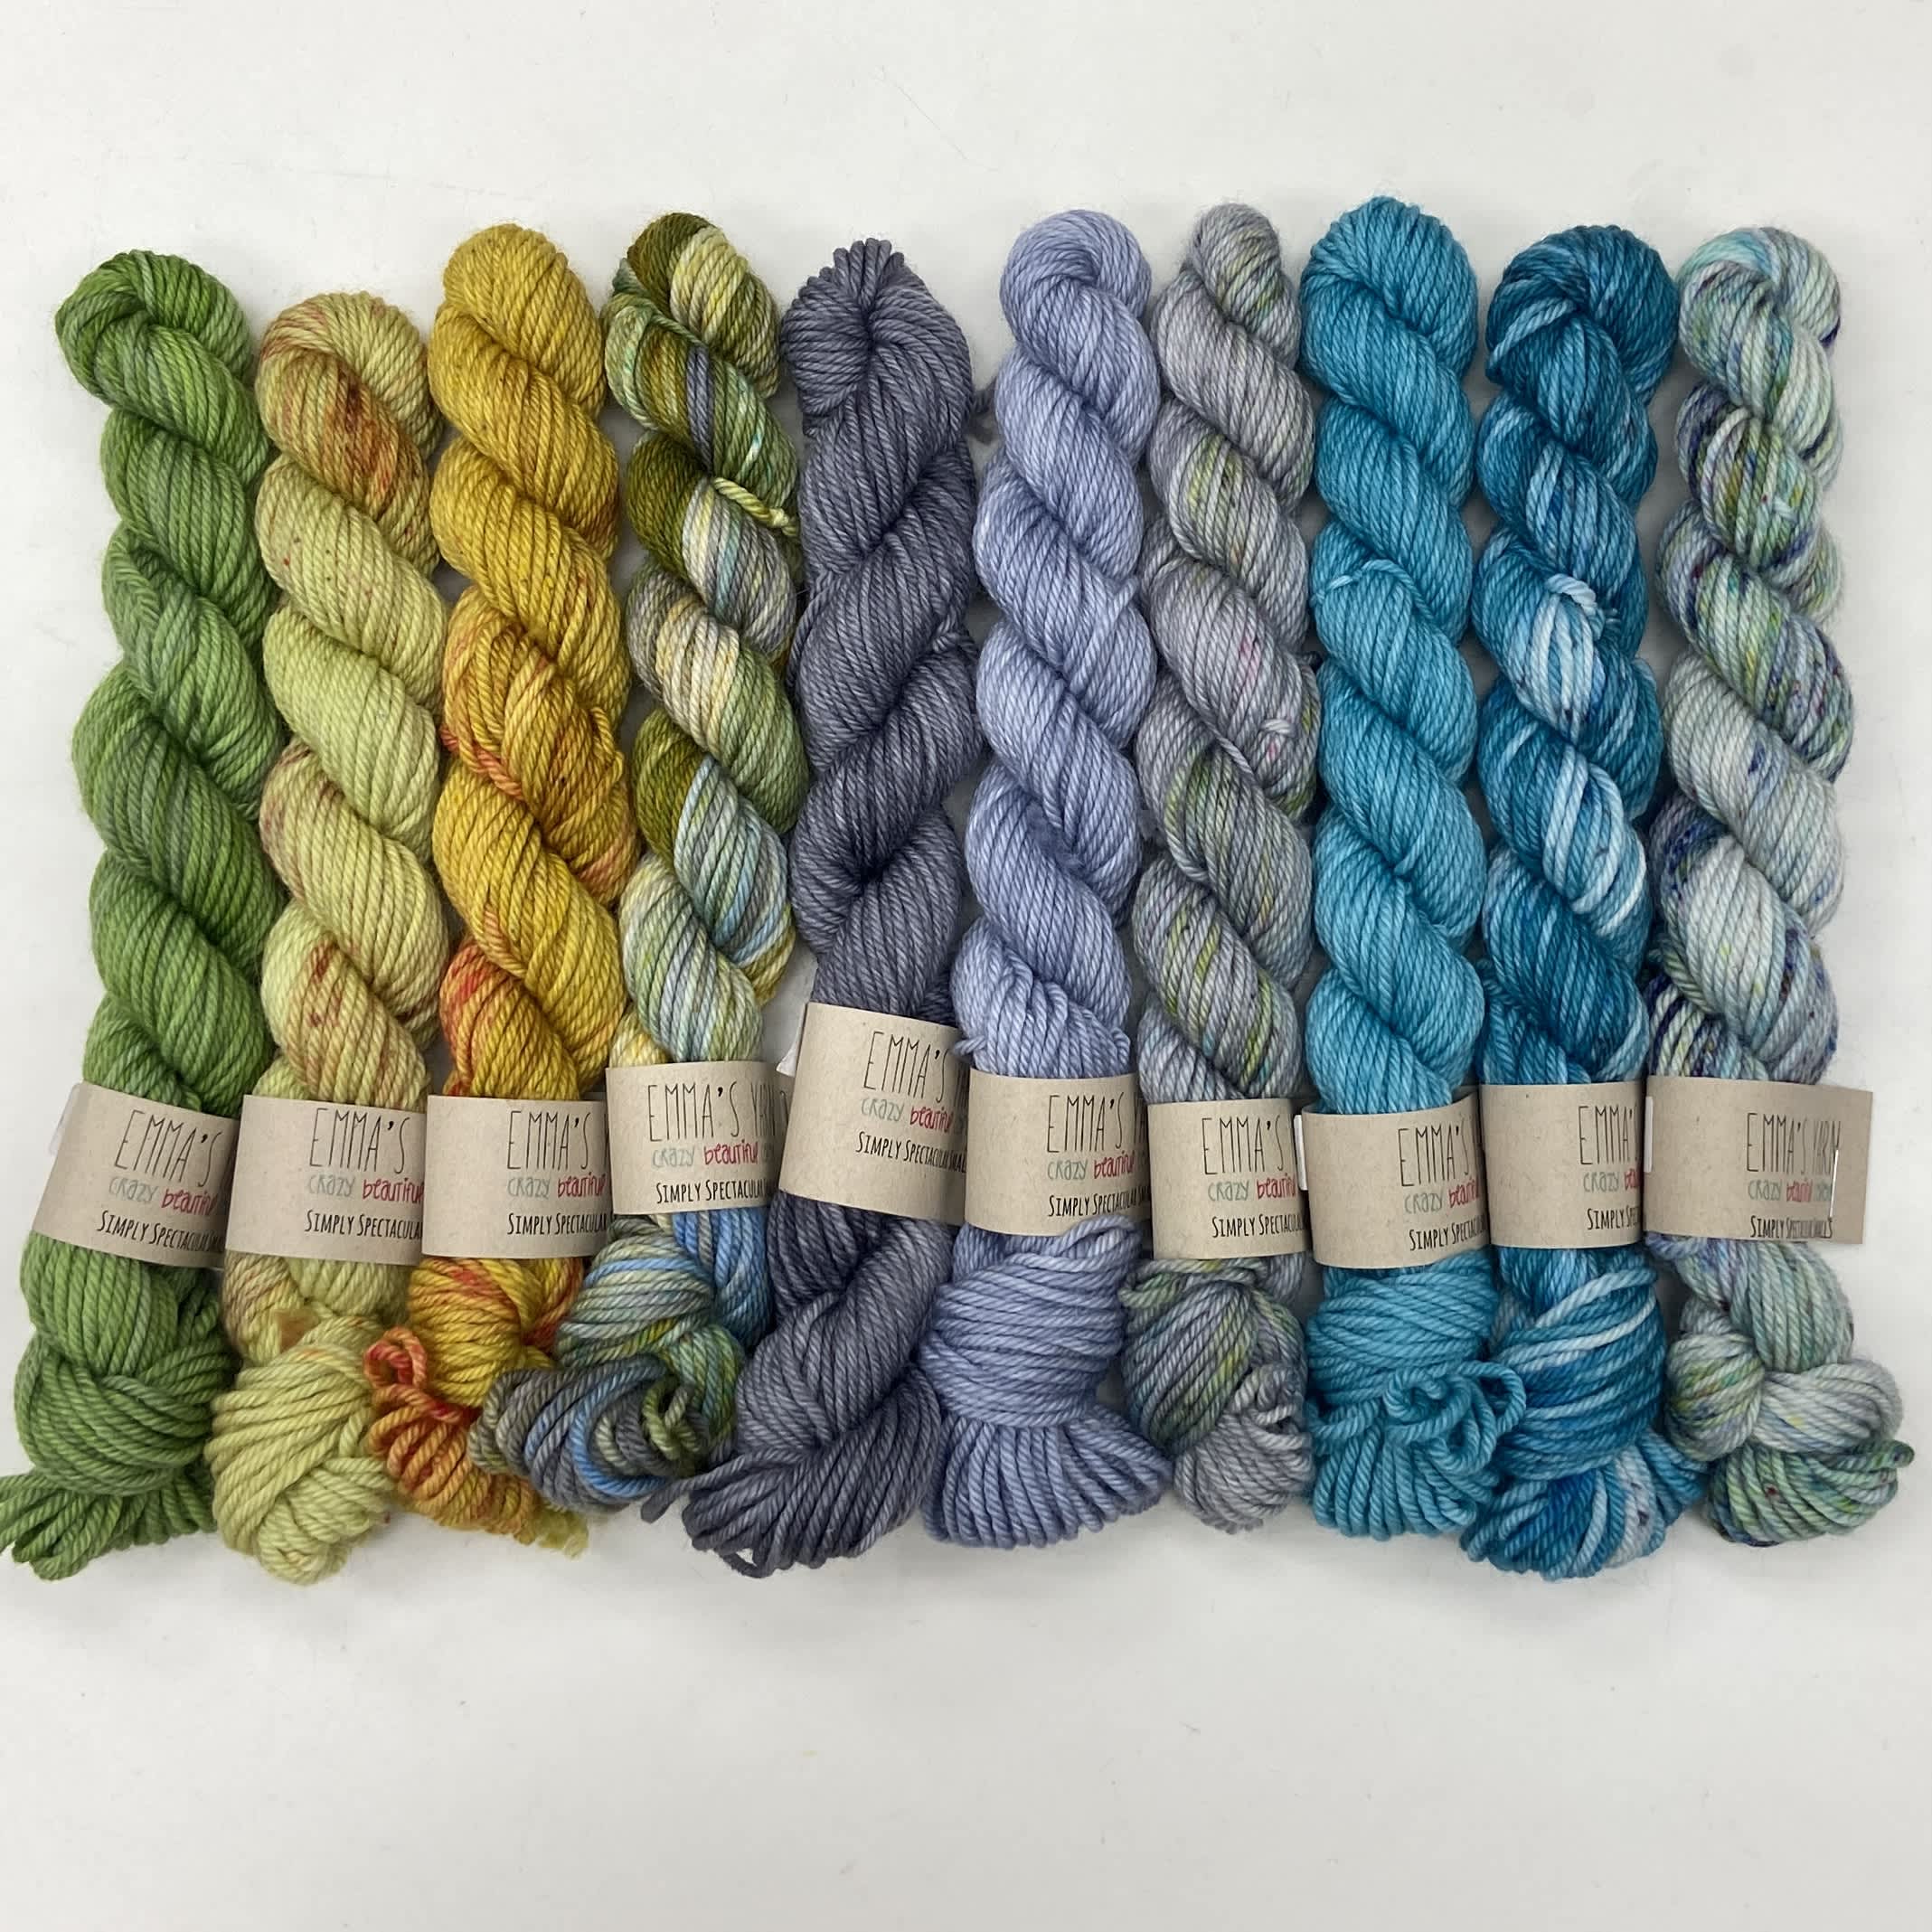 My Favorite DK and Worsted Weight Yarn